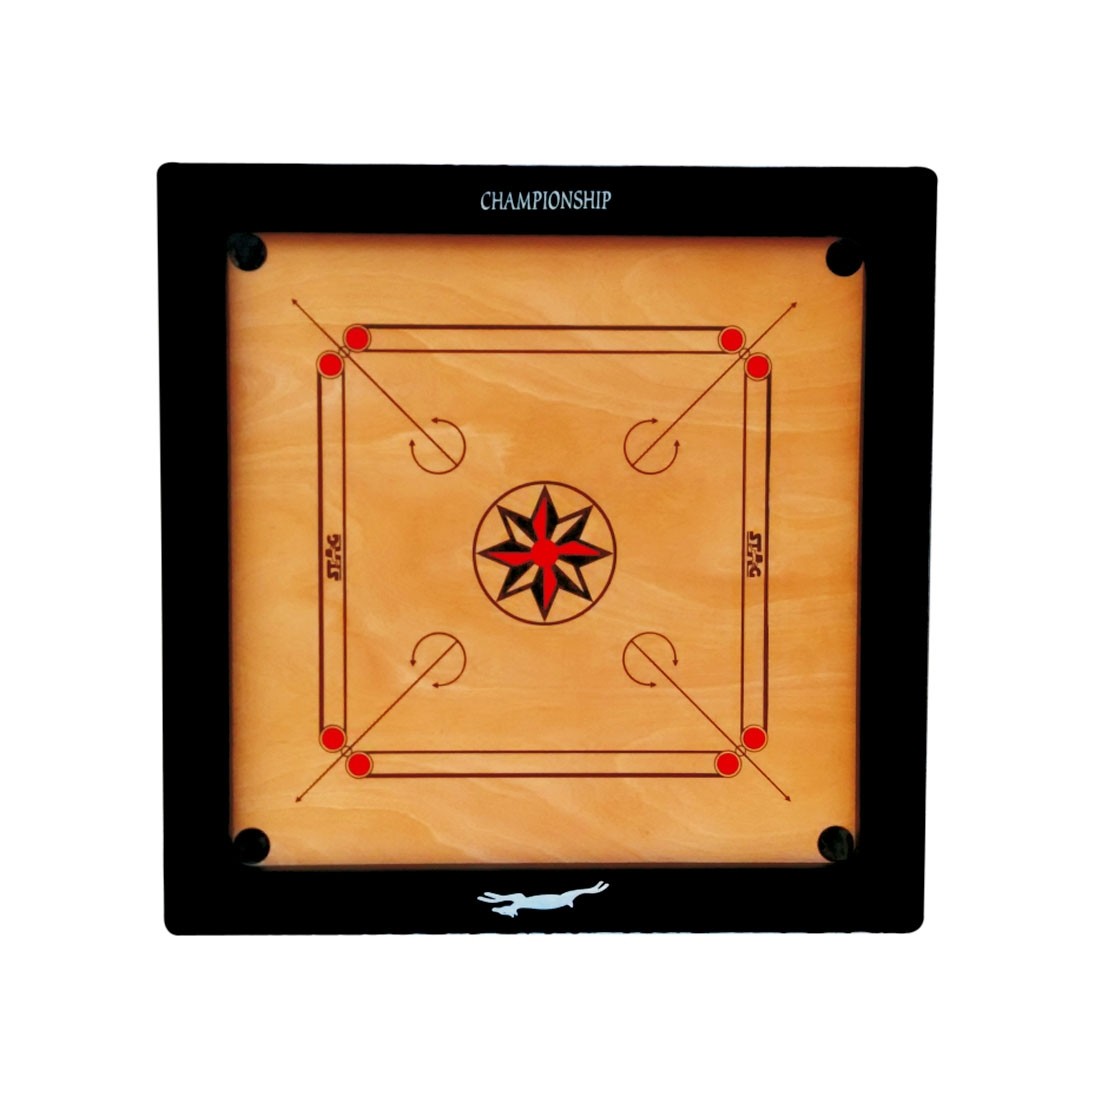 STAG CARROM BOARD CHAMPIONSHIP 3" BORDER 12MM M.D.F. WITH WHEELS